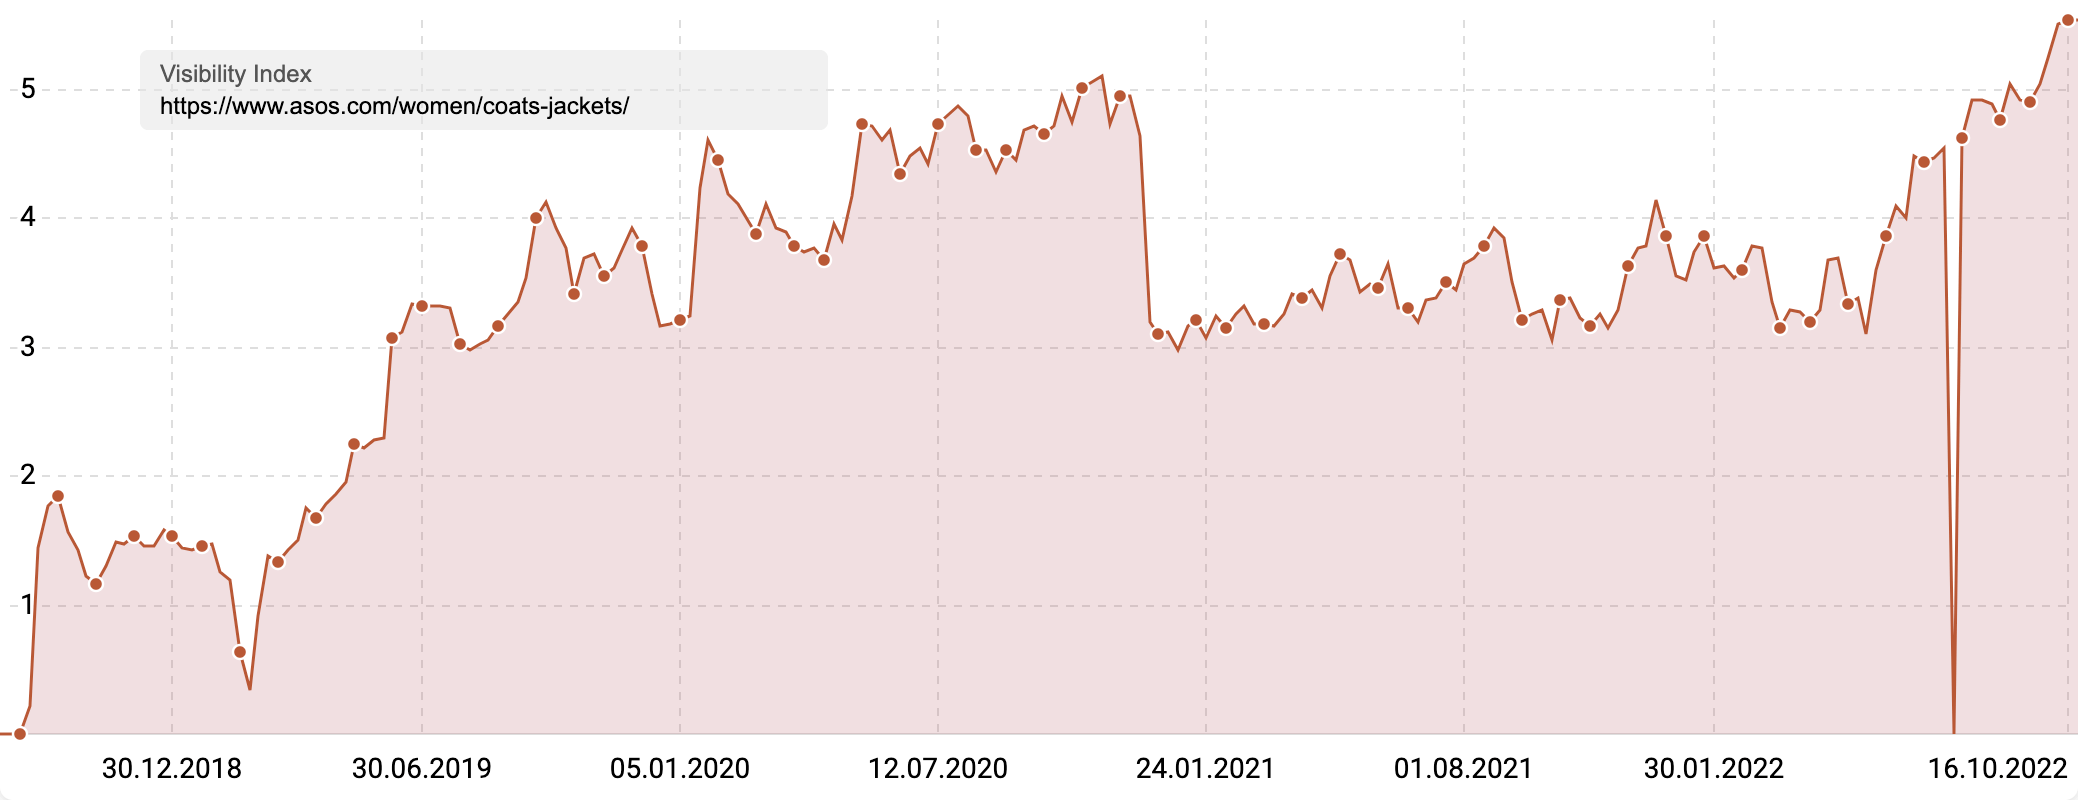 Visibility Index chart (5 years)